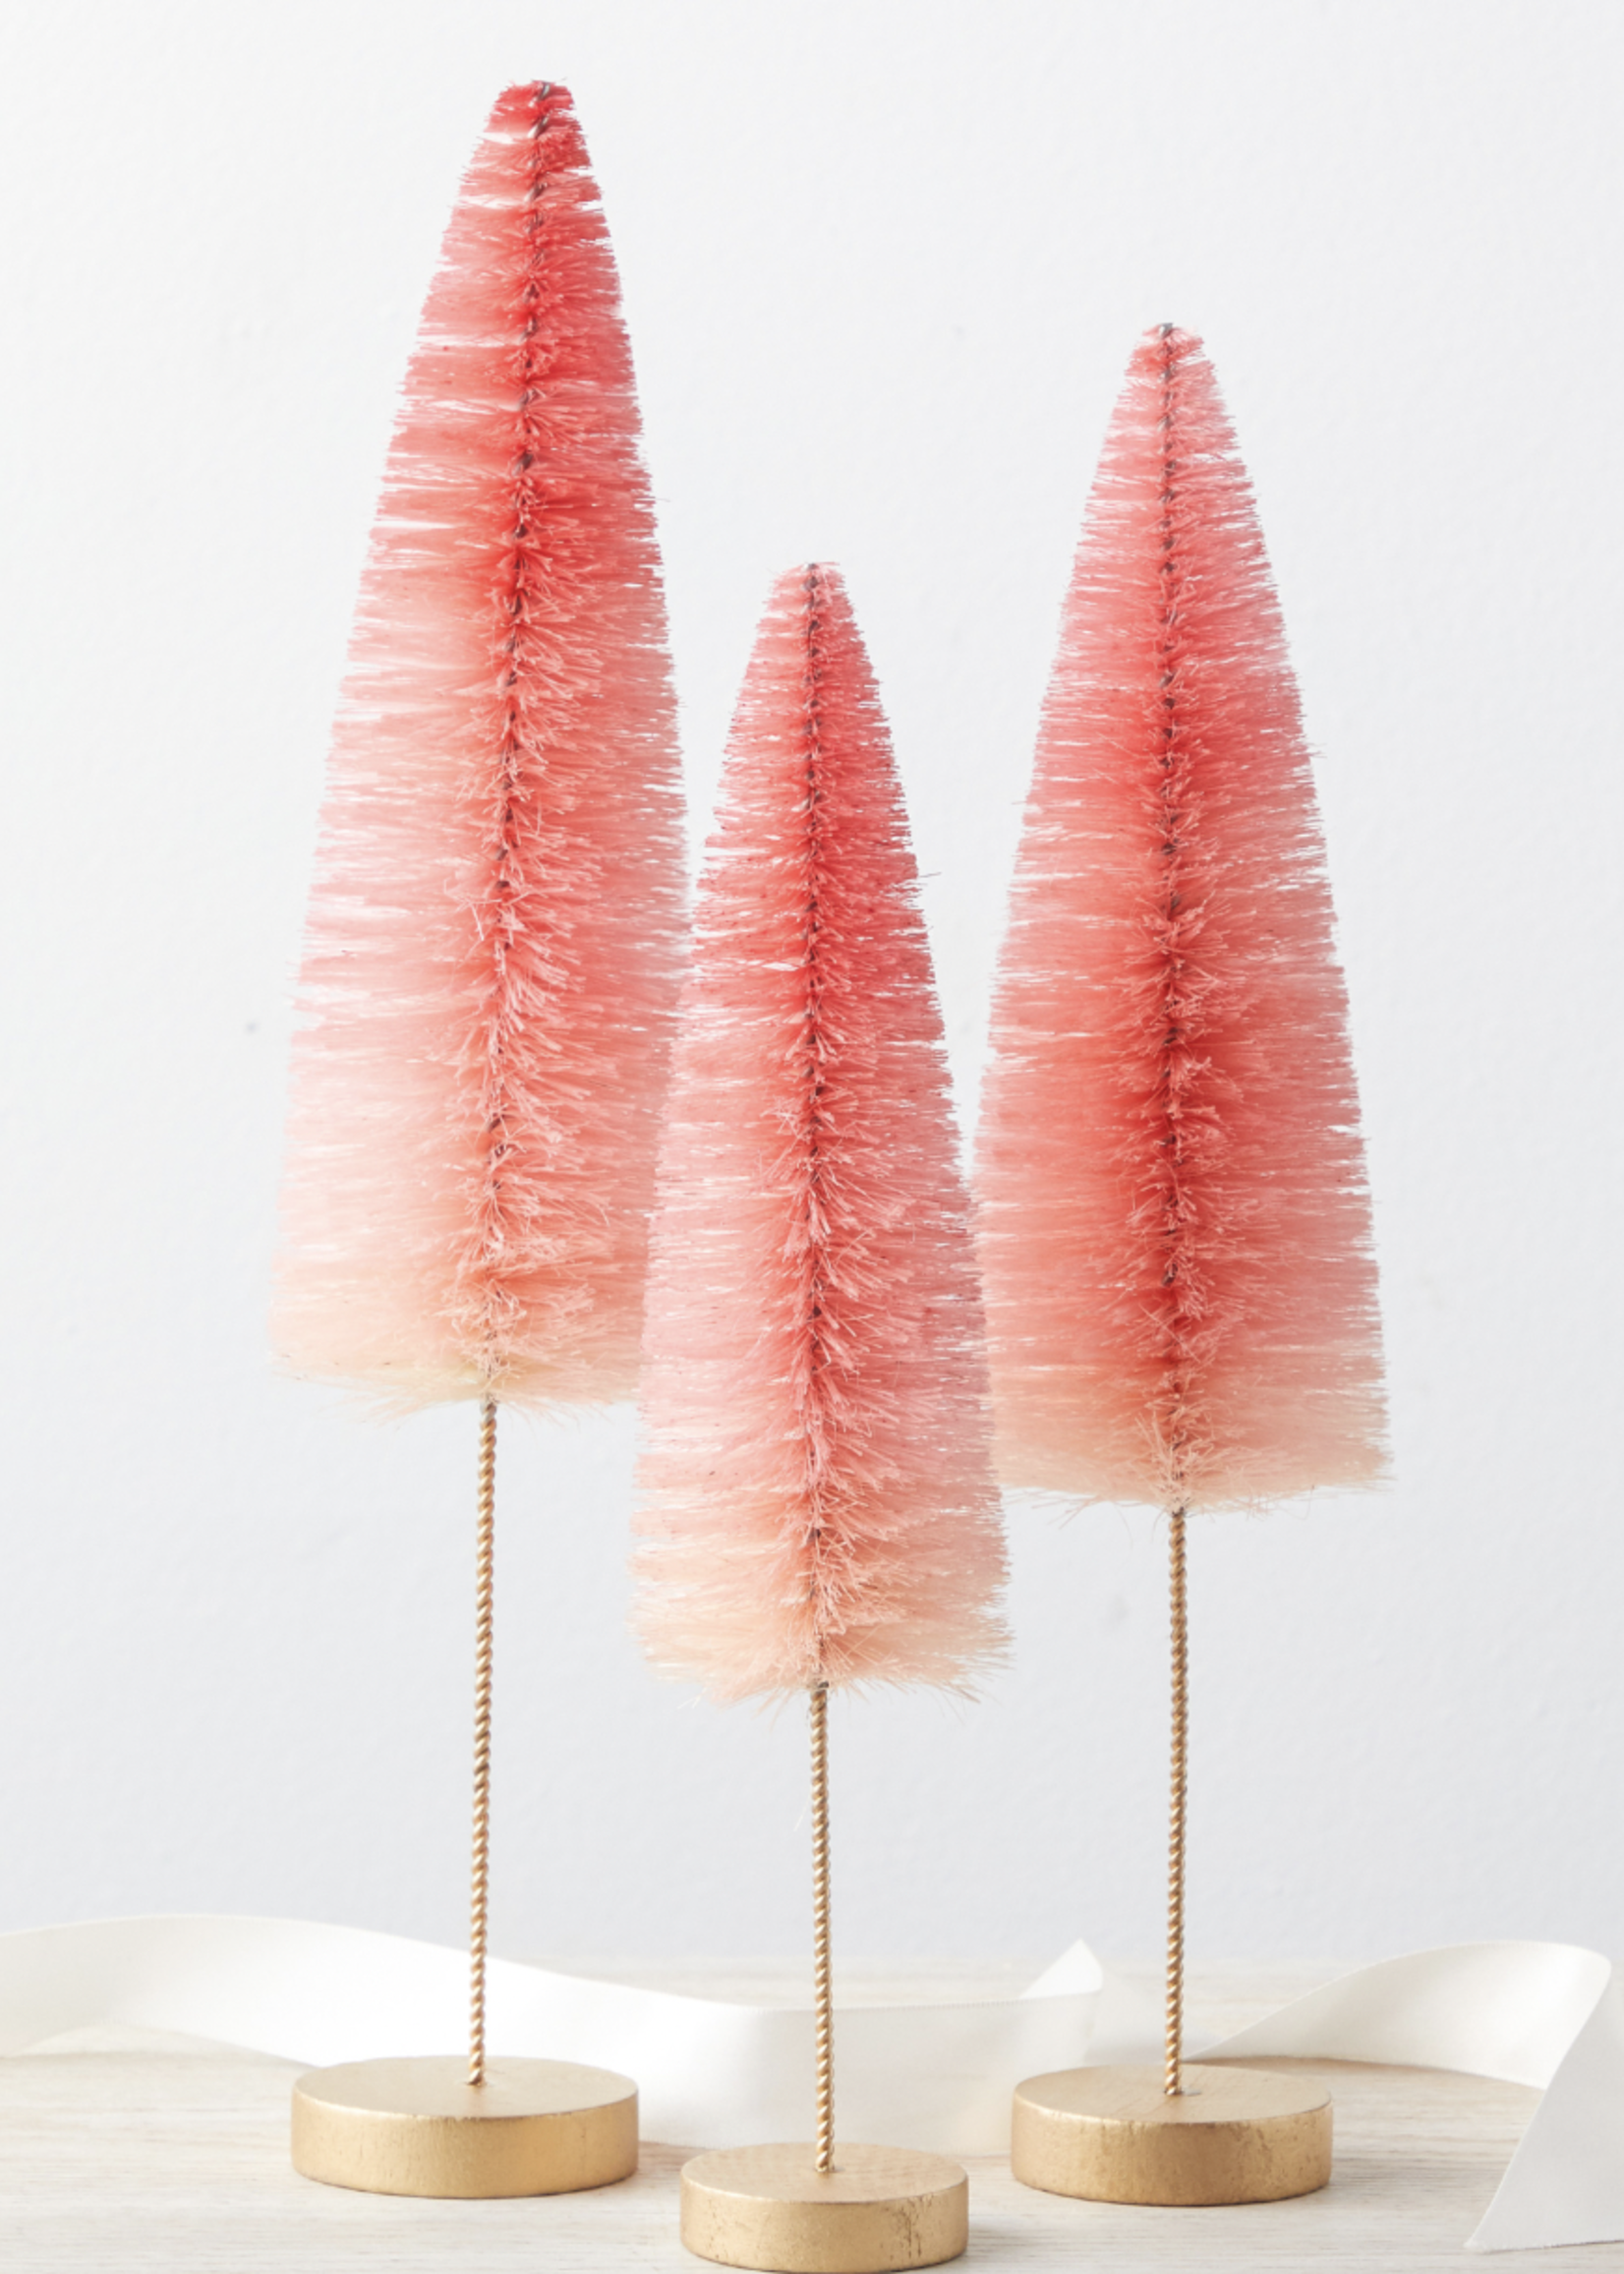 Creative Twist Events Bottle Brush Trees in Sets of 3  Pink Ombre set of 3